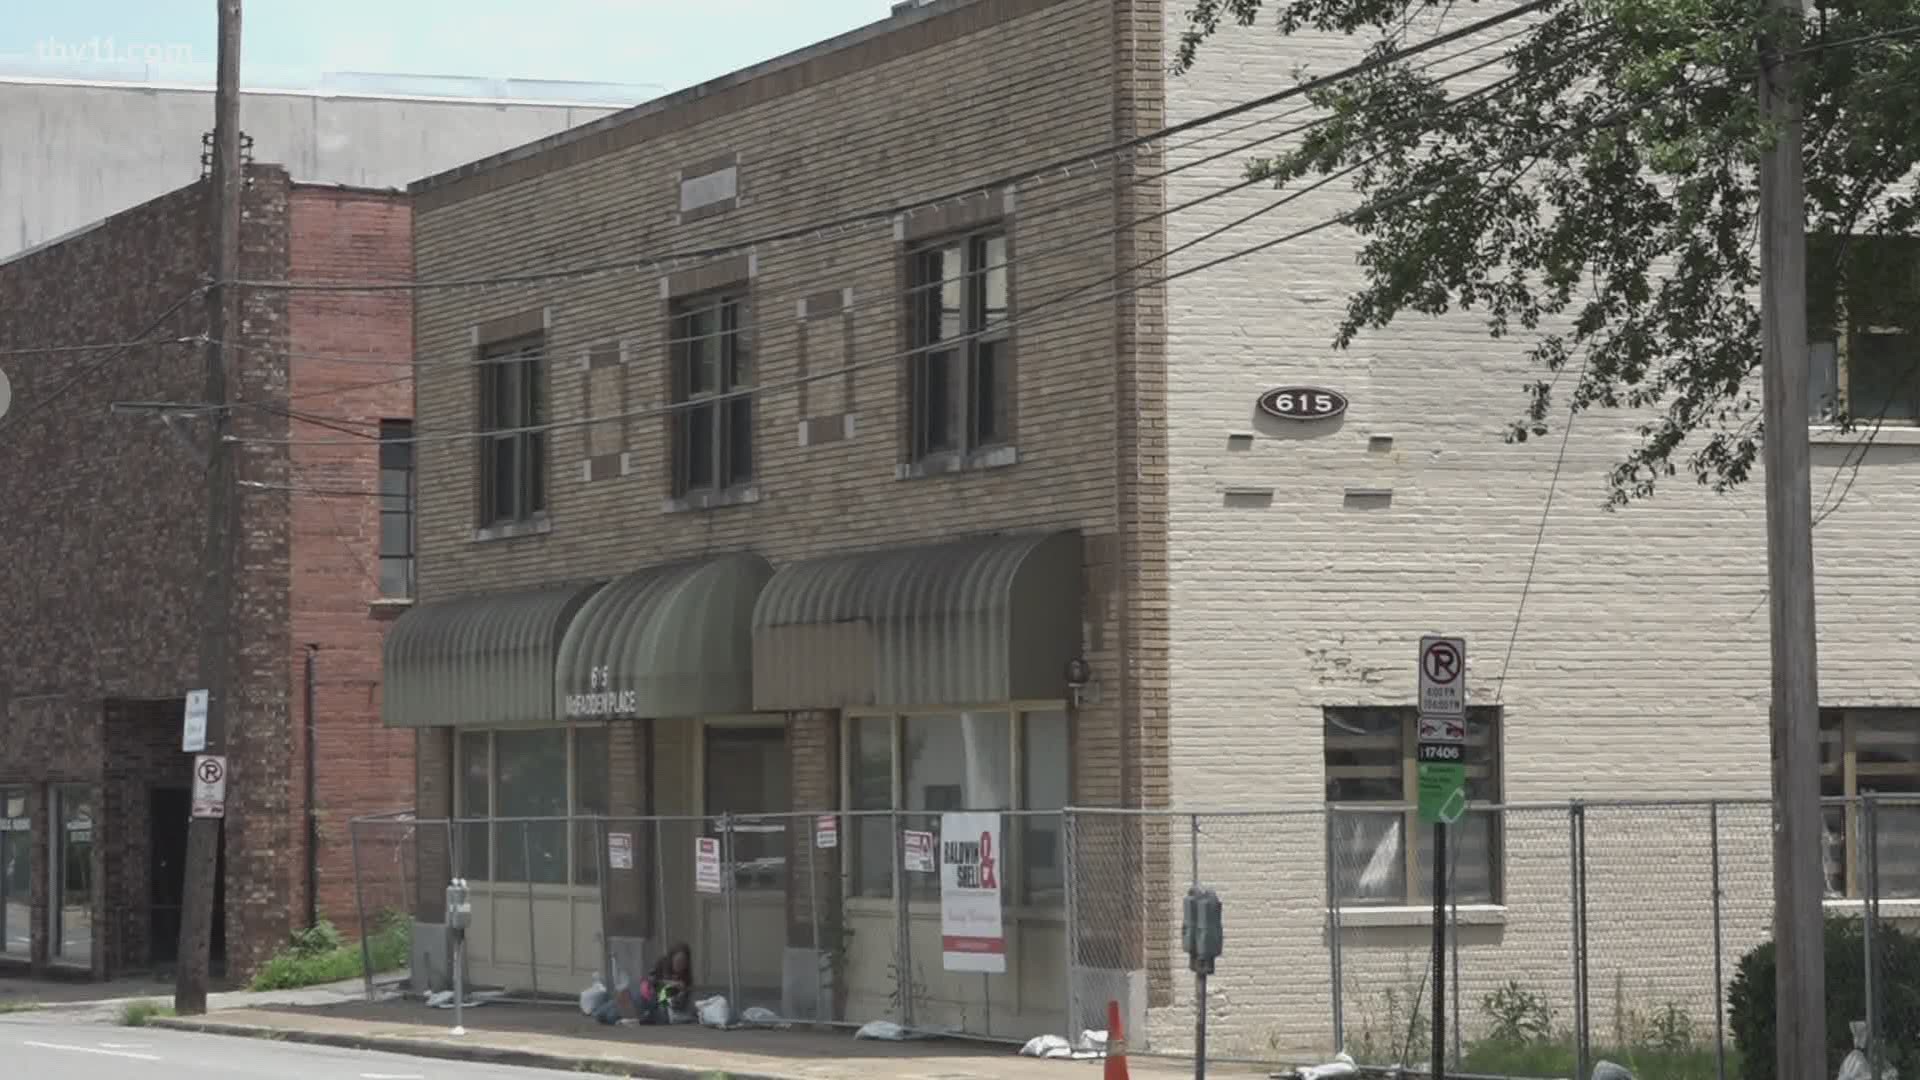 The Little Rock Police Department will be getting a new headquarters, but it's not moving too far. The department's officers say the change was much needed.